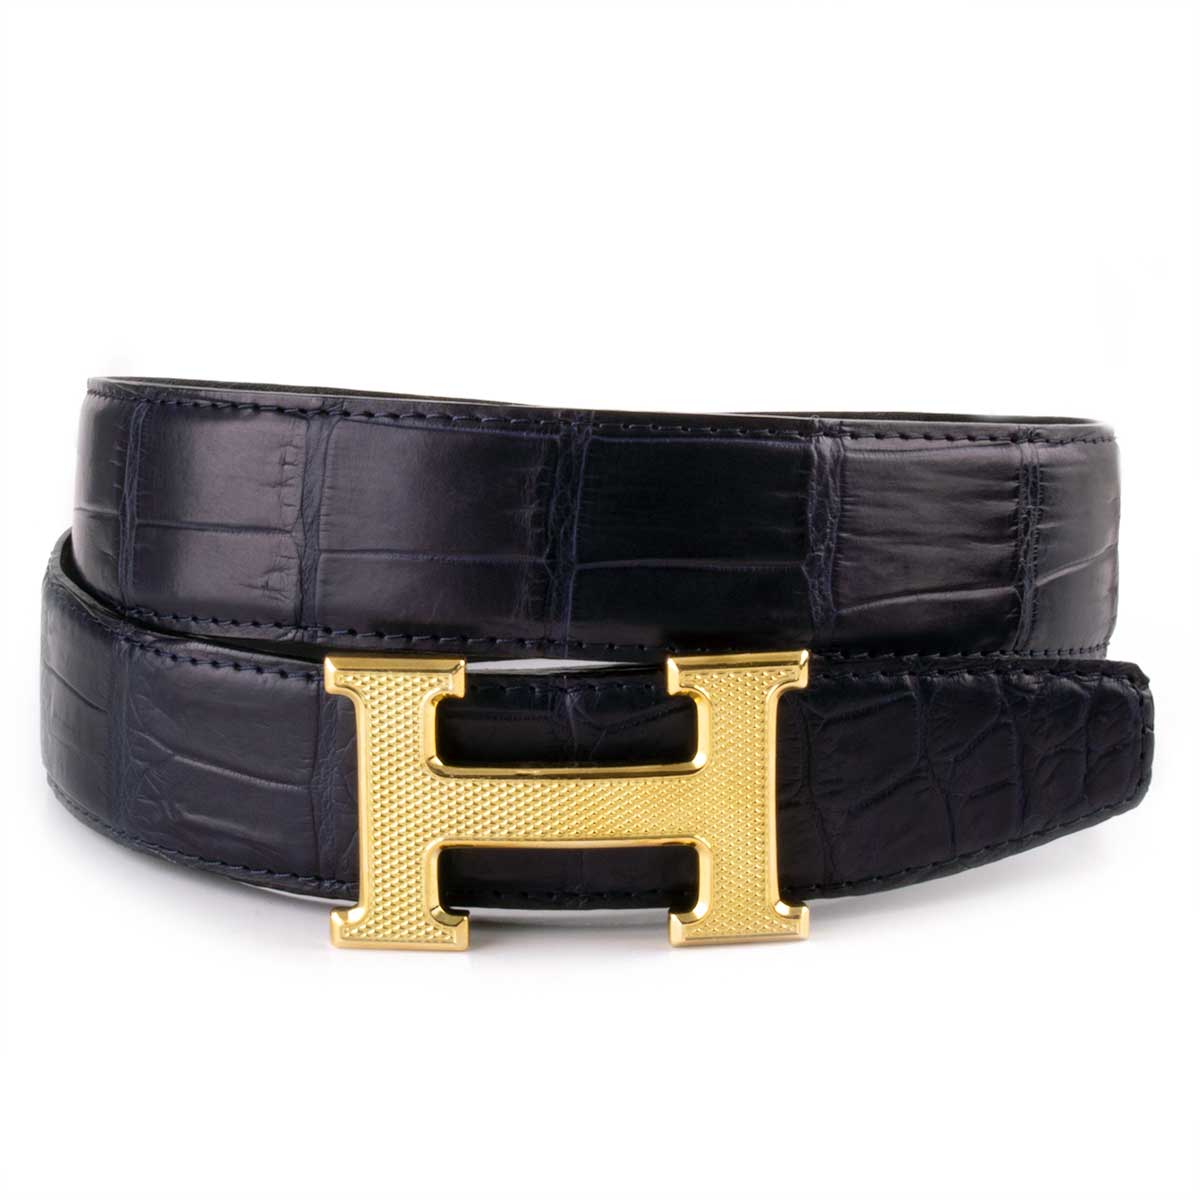 Leather B Buckle Belt in Black/gold - Men | Burberry® Official